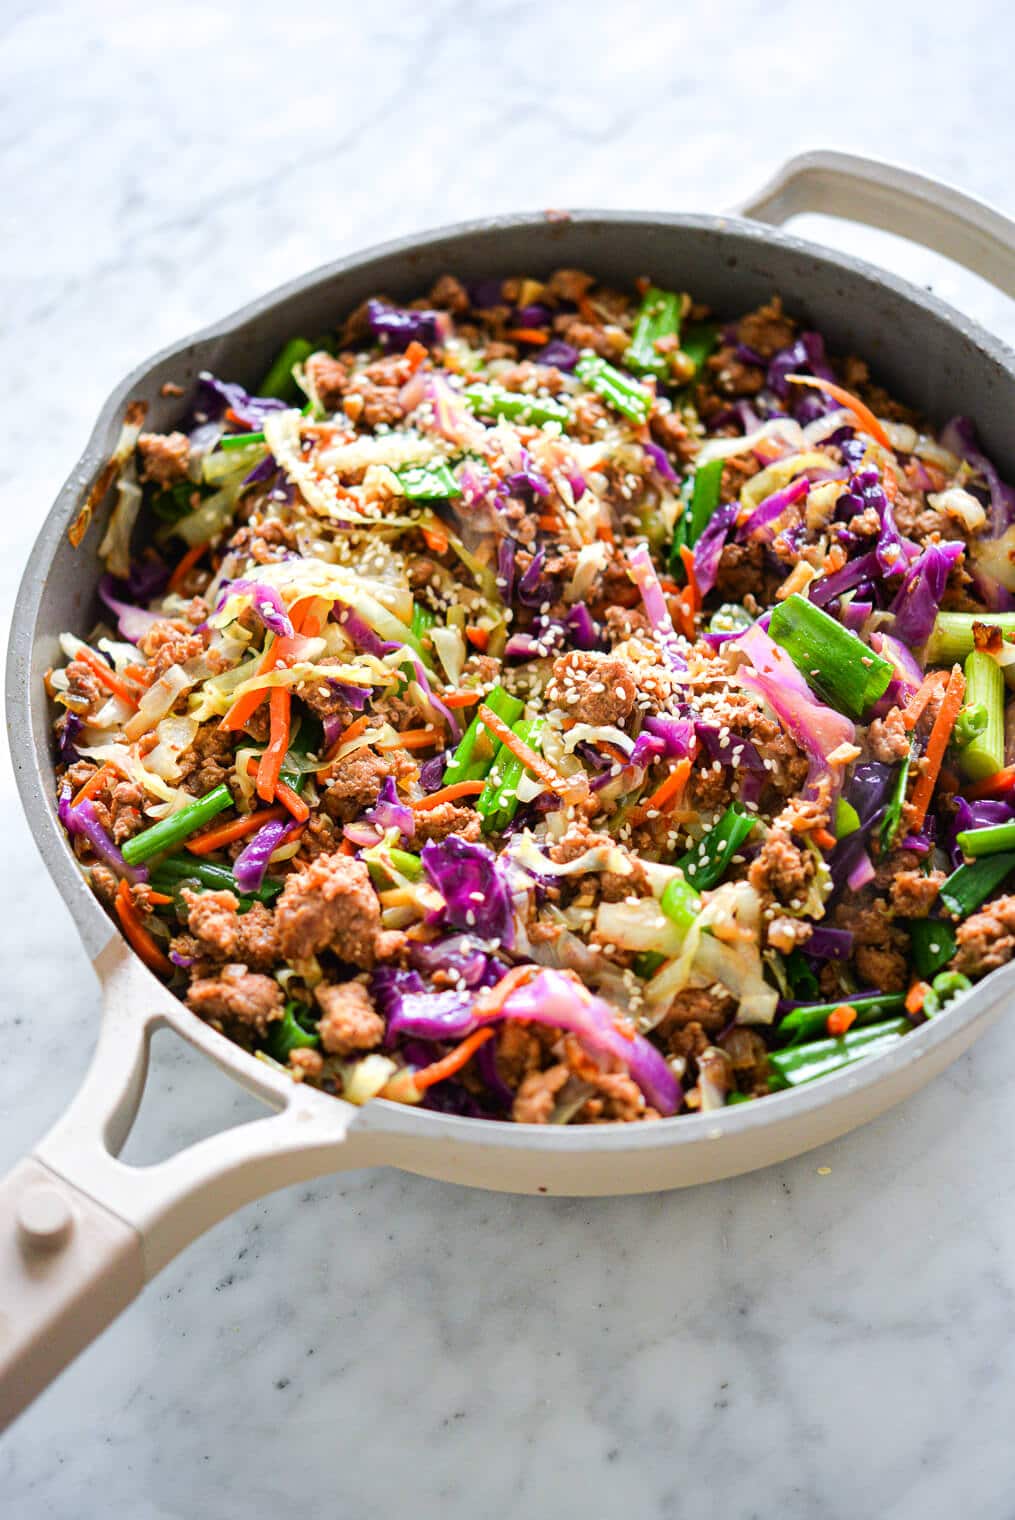 Sauté pan with egg roll in a bowl with vibrant colors of purple, orange, and green.